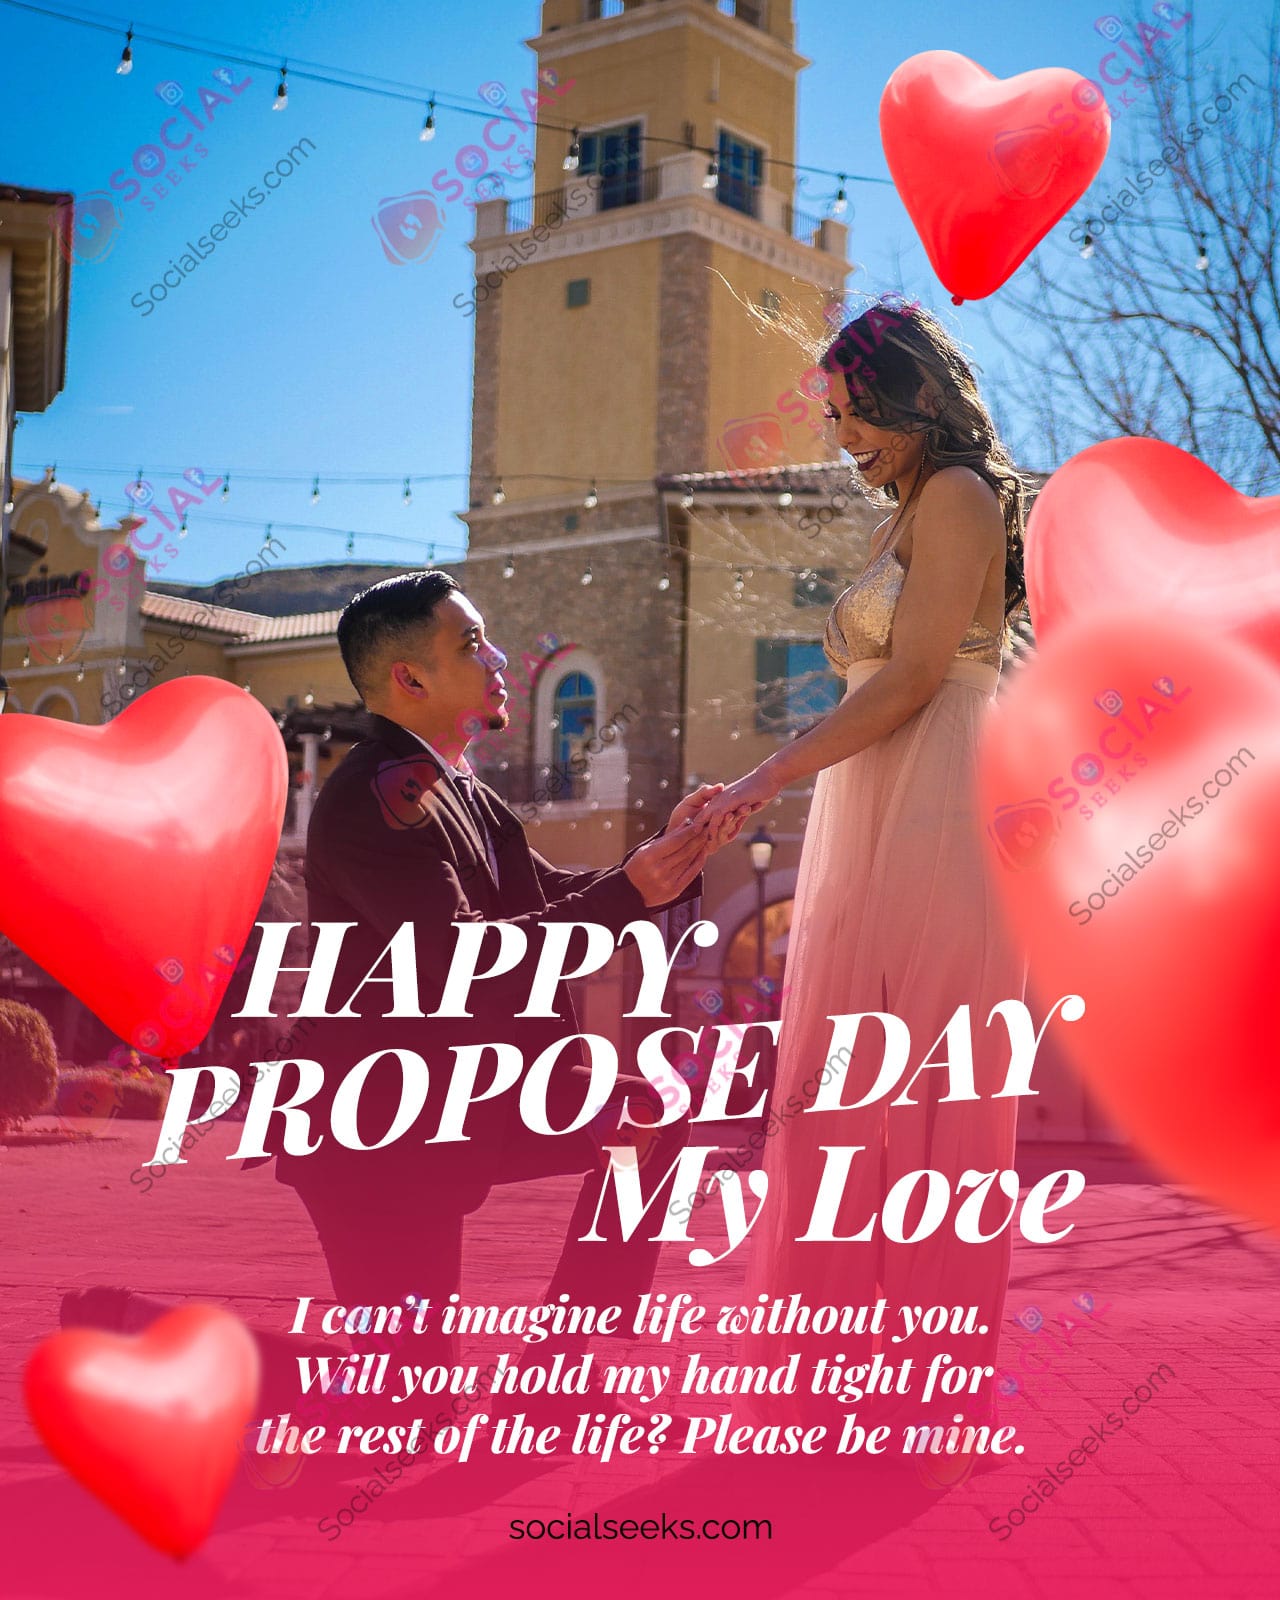 Happy Propose Day Photo Frame With Unique Note